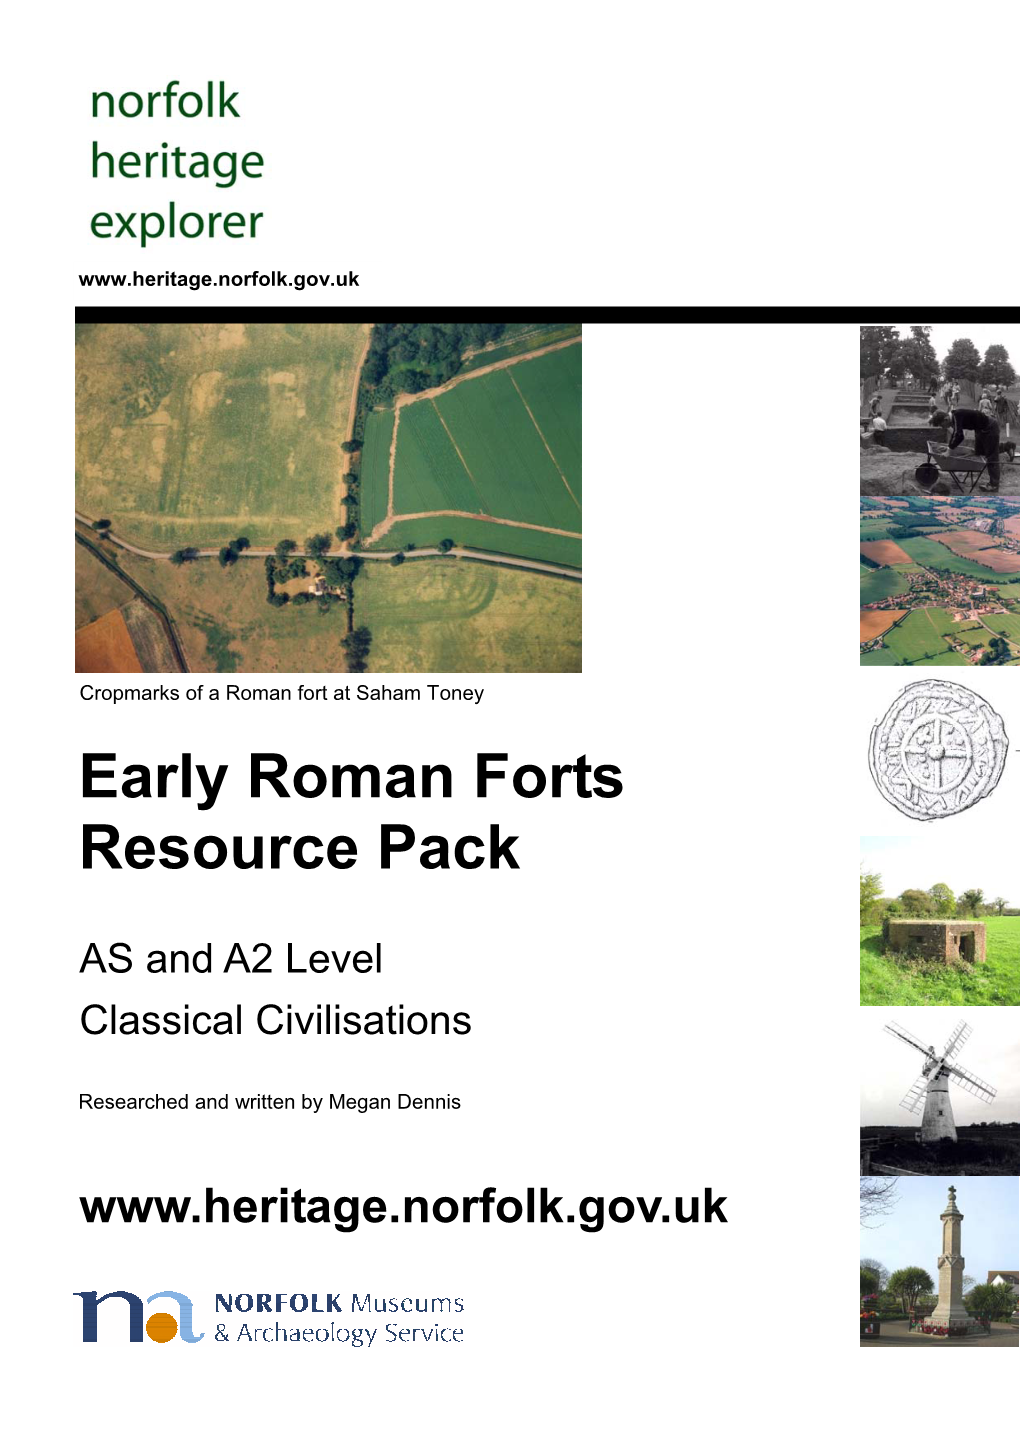 Early Roman Forts Resource Pack